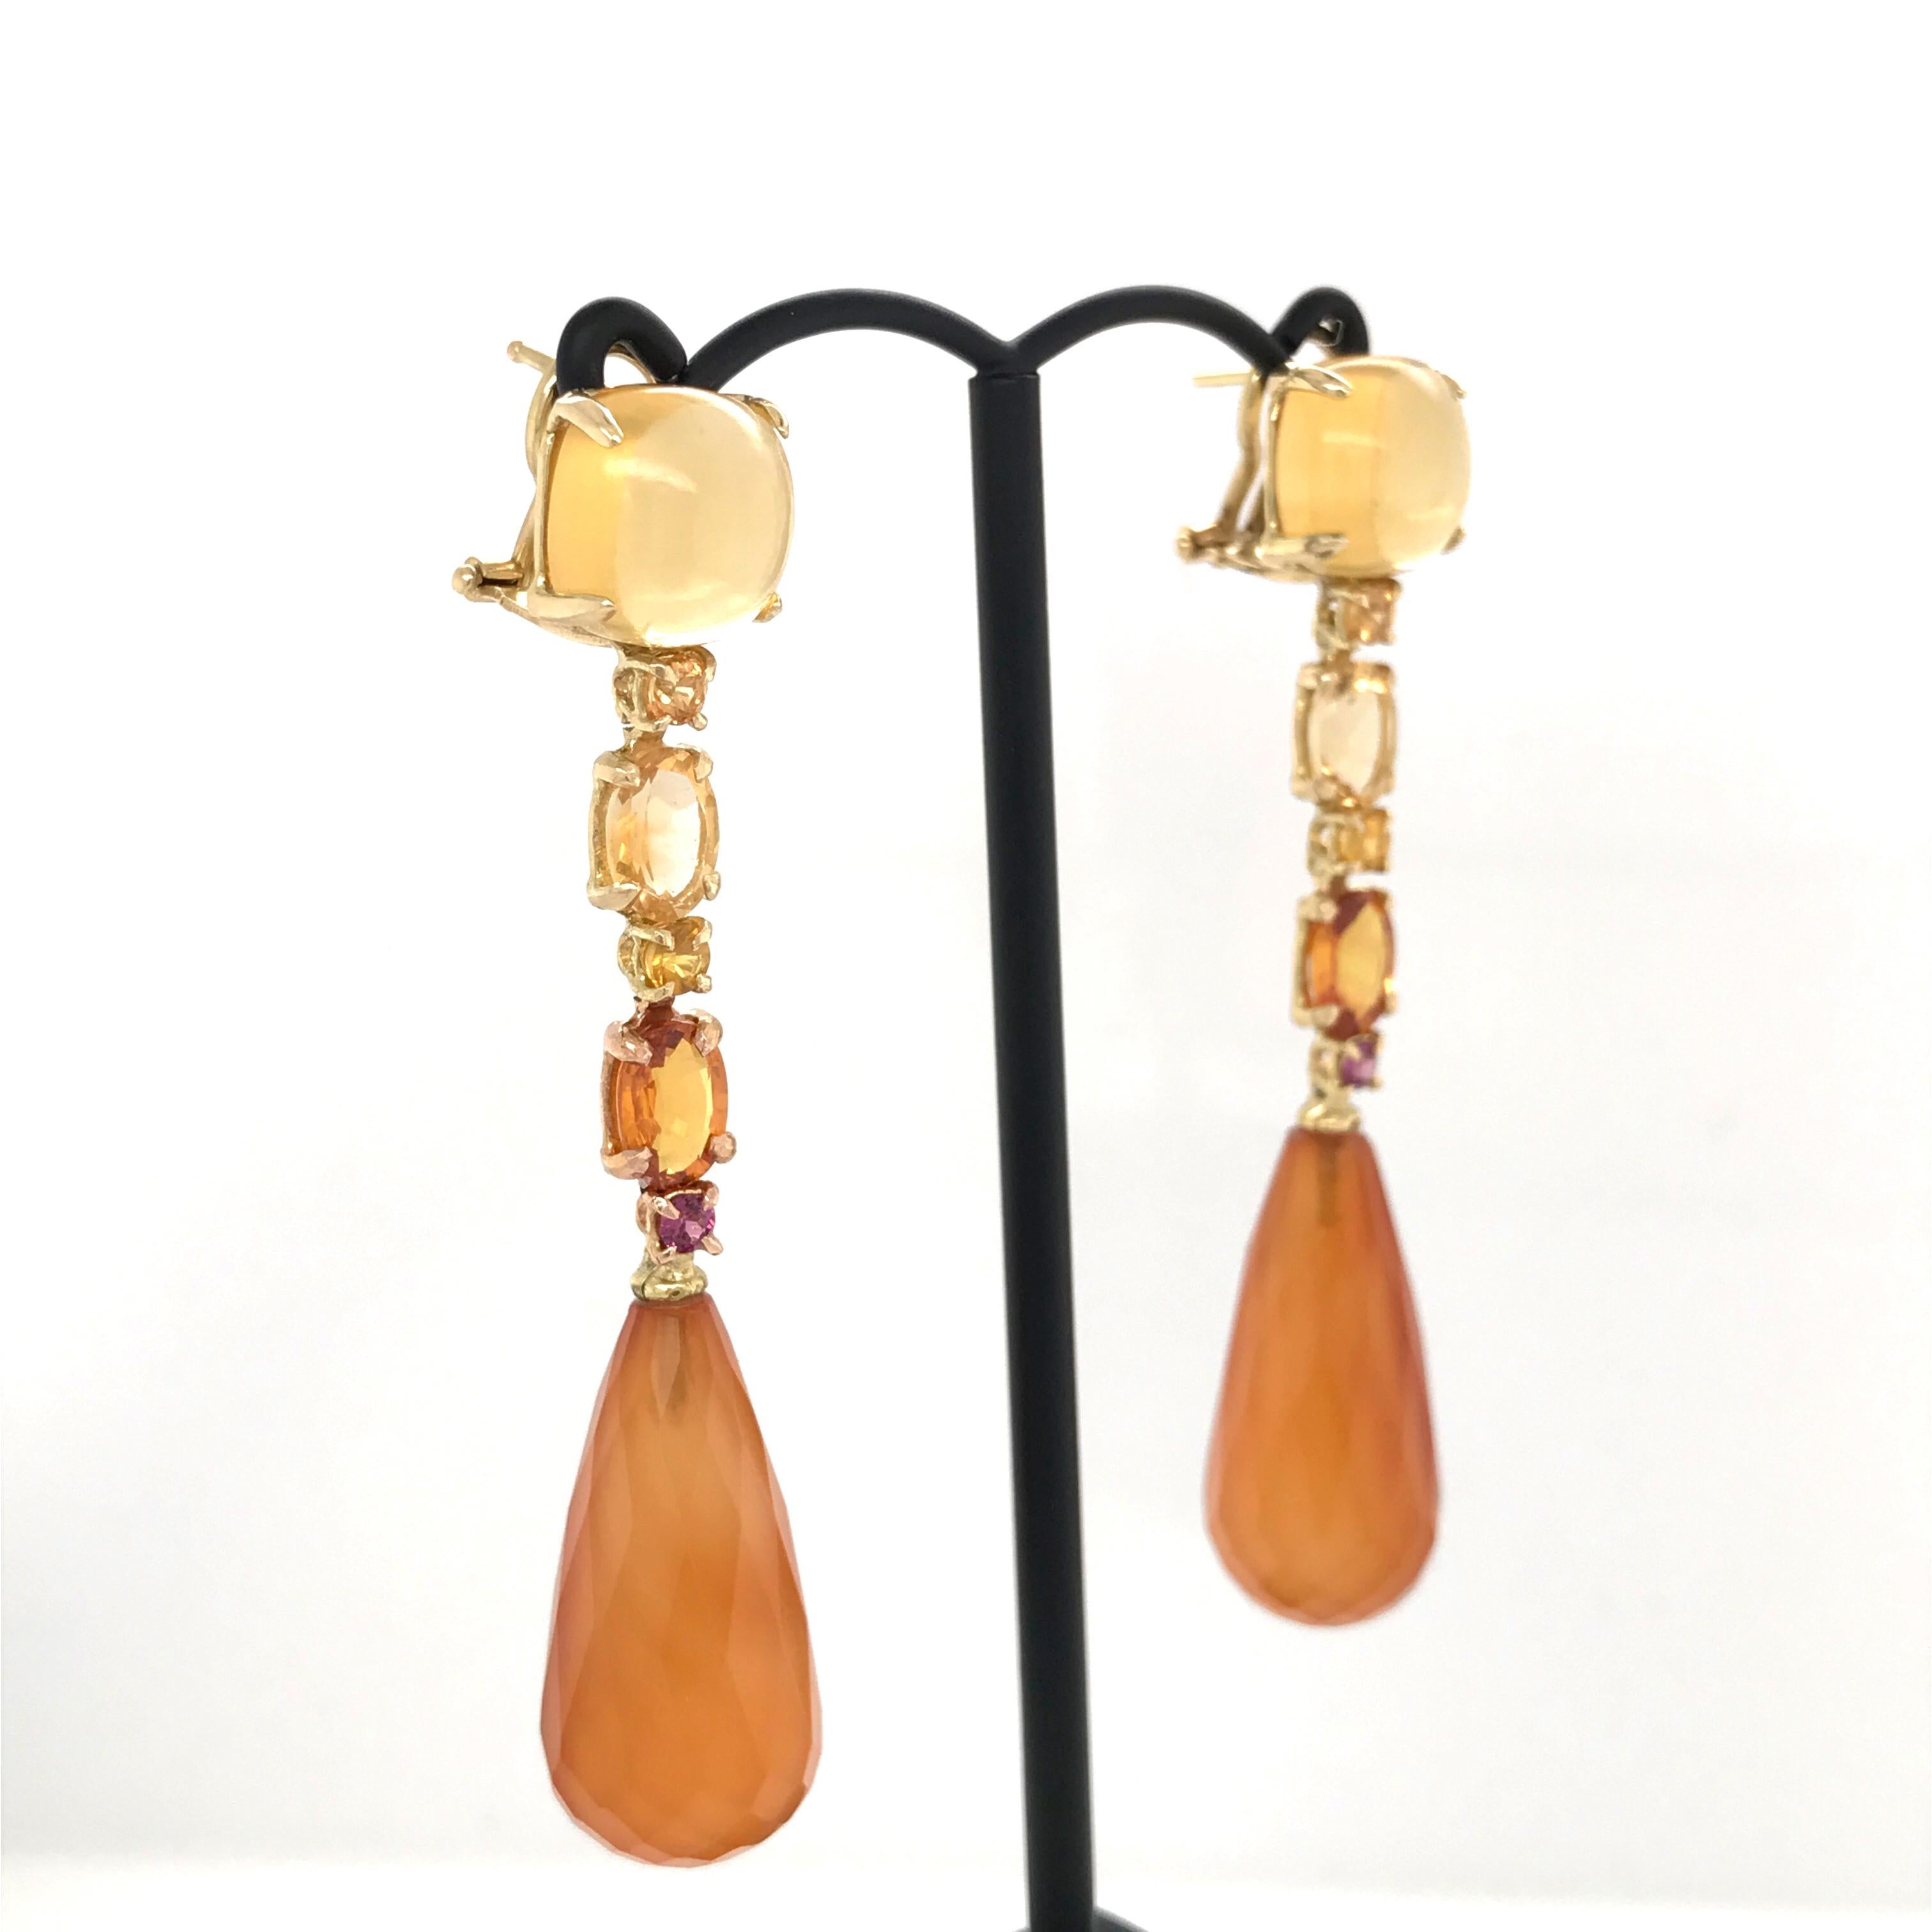 Check out these stunning chandelier earrings showcasing dazzling gemstones including citrine, carnelian and yellow sapphire. These earrings are a true work of art, harmoniously combining different colors and shapes of stones to create a luminous and